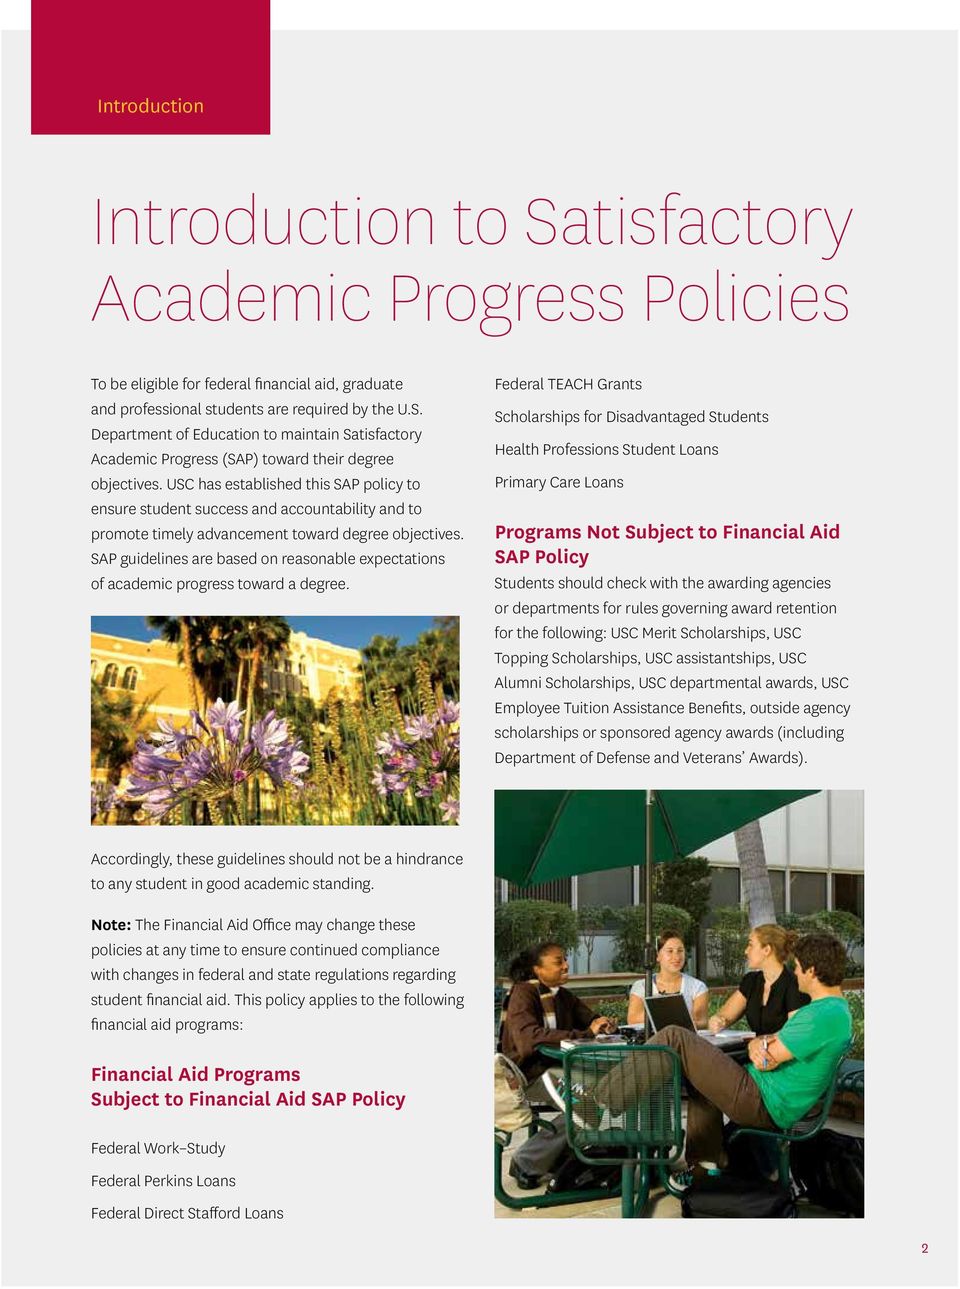 SAP guidelines are based on reasonable expectations of academic progress toward a degree.